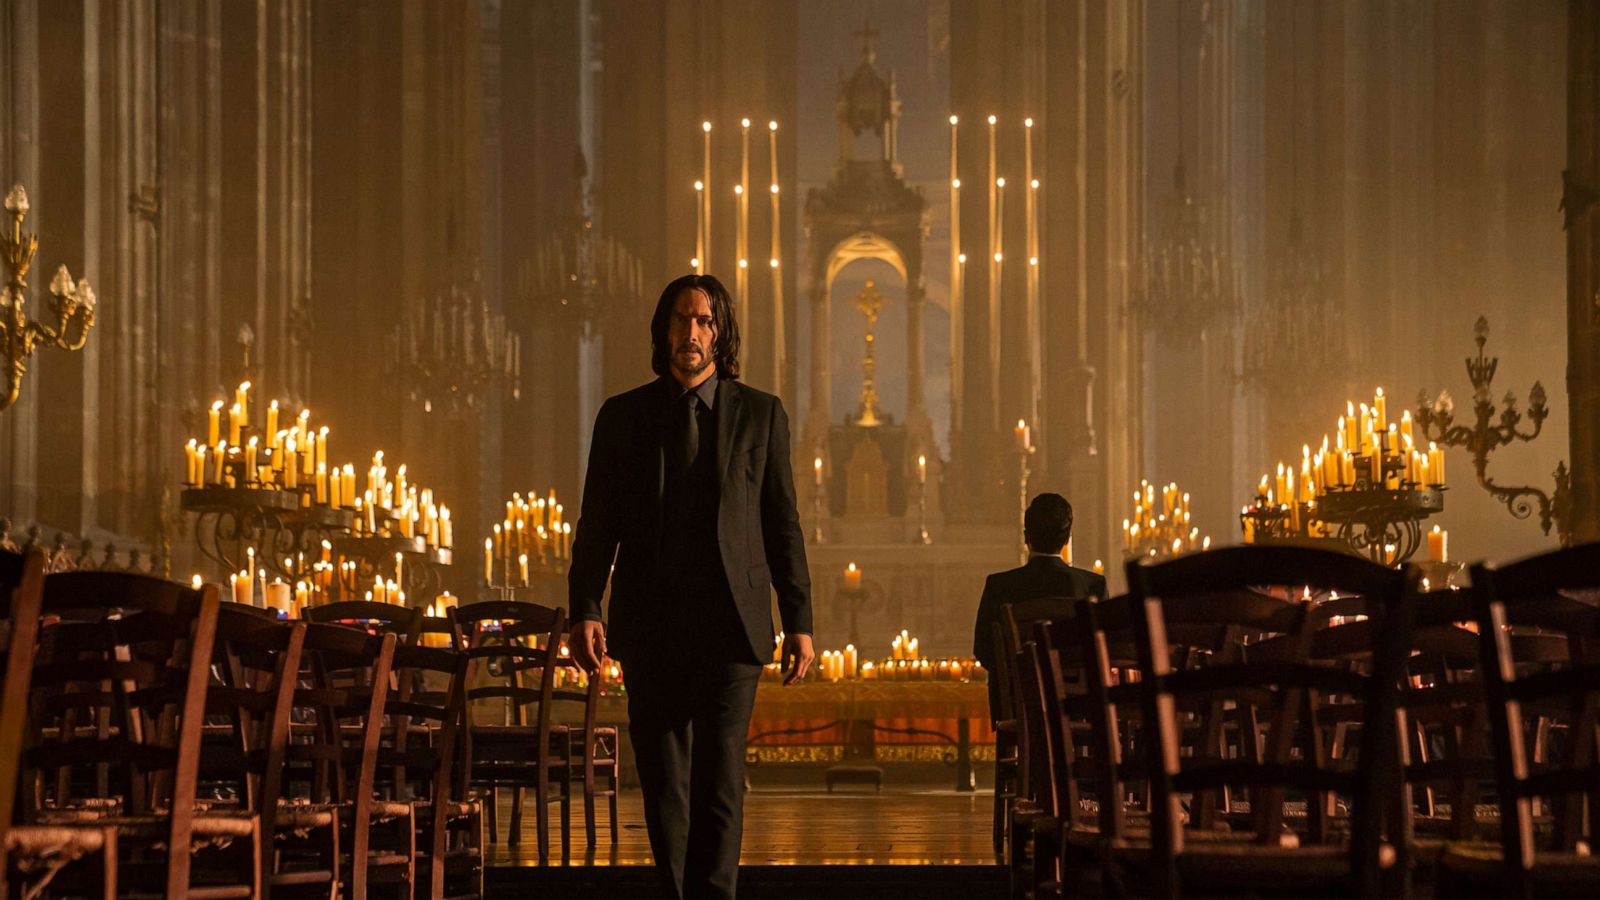 Keanu Reeves is back in new trailer for 'John Wick: Chapter 4' Morning America